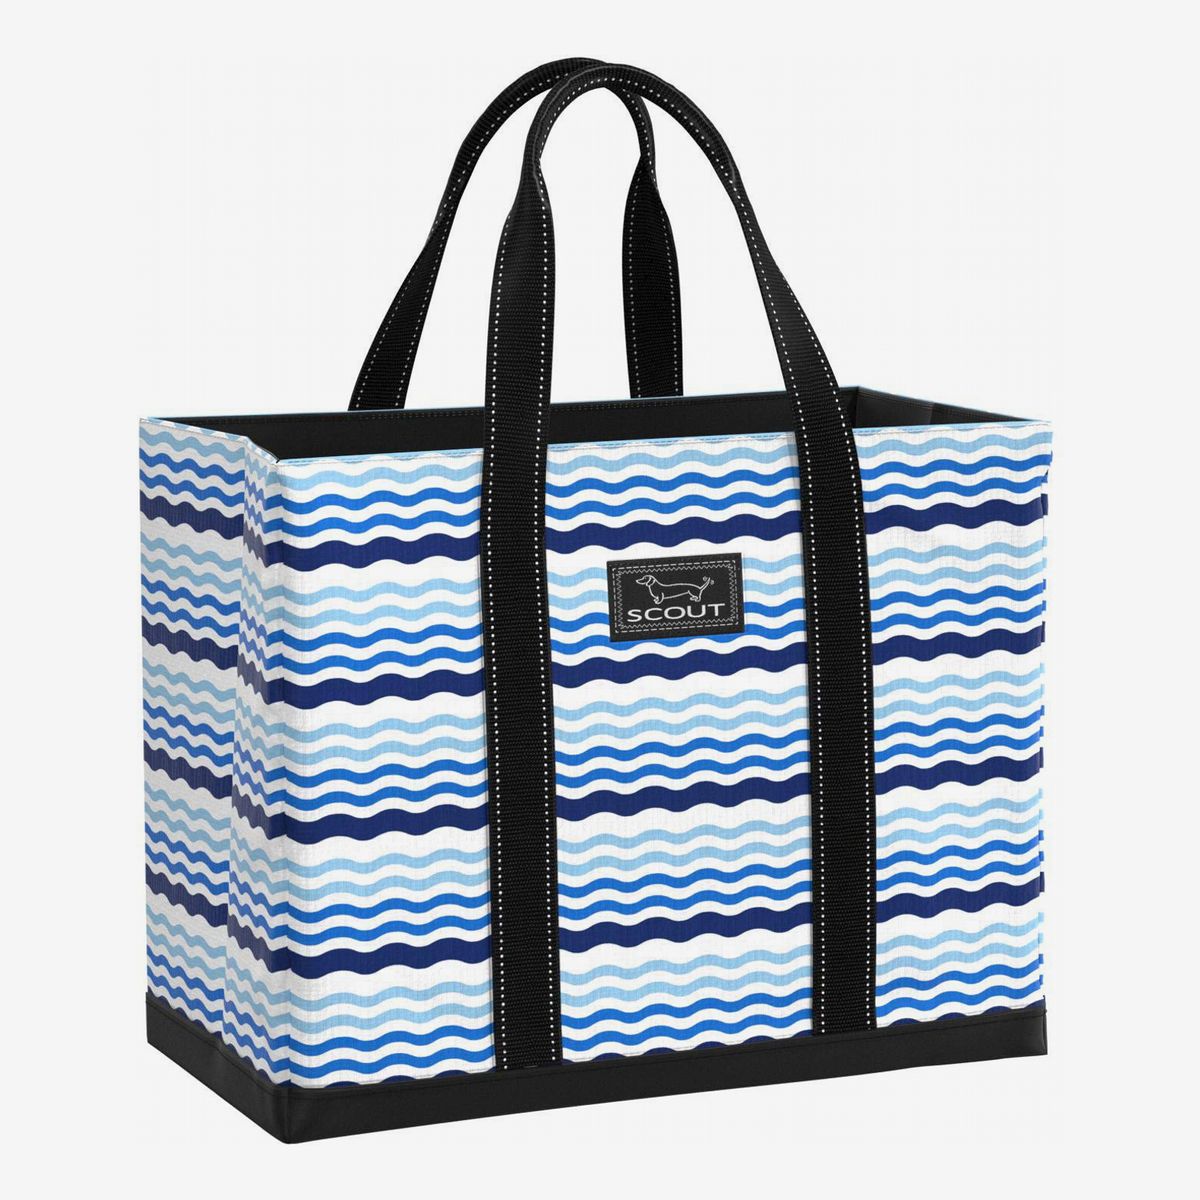 Boat Bag Pool Bag Navy Palm Water Resistant Extra Large Beach Bag Cove Beach and Shopping Bag Shopping Bag for Women The Cove Carryall Beach Tote Made for Wet Beach Gear 